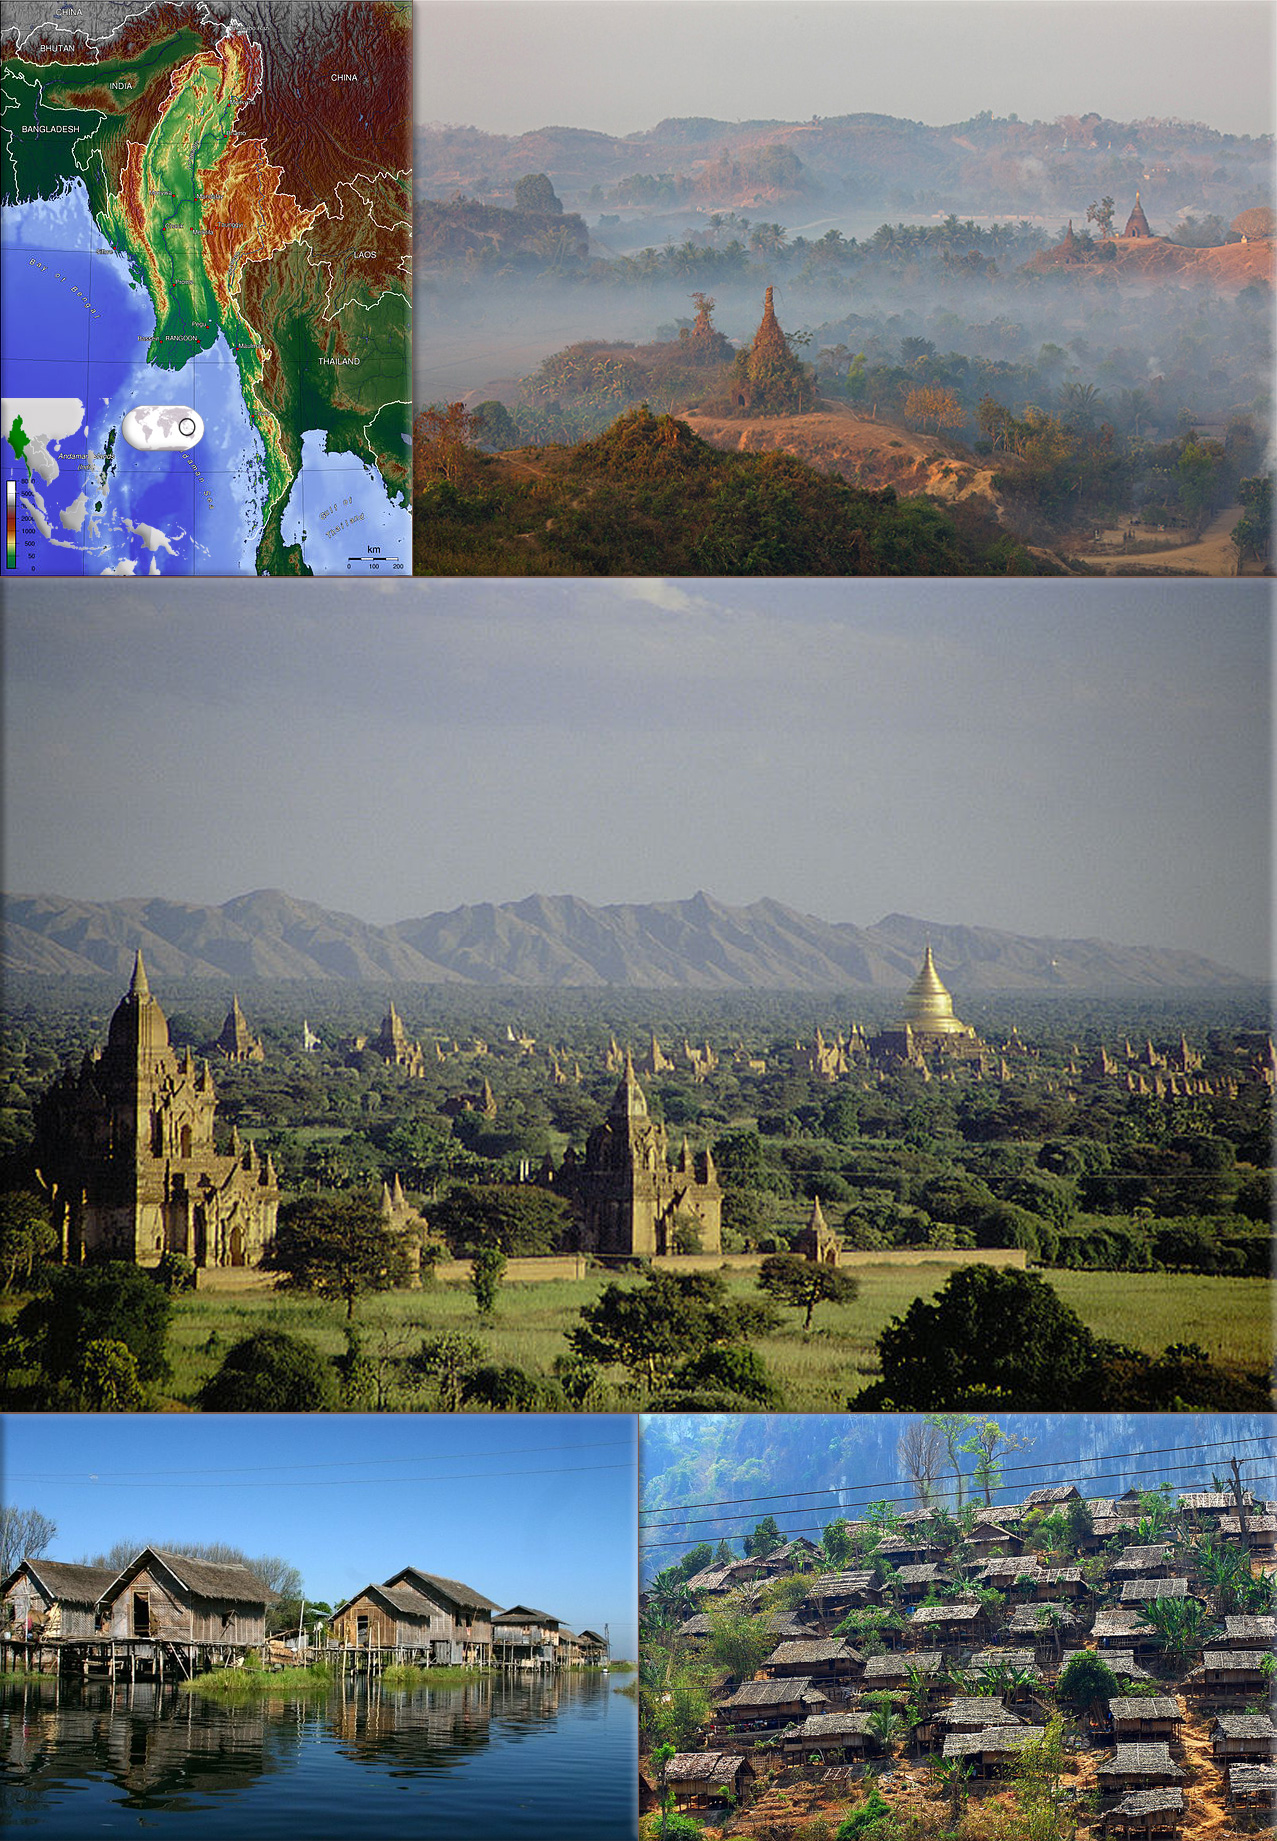 Burma (Myanmar) is a sovereign state in Southeast Asia. It is bordered by India, Bangladesh, China, Laos and Thailand